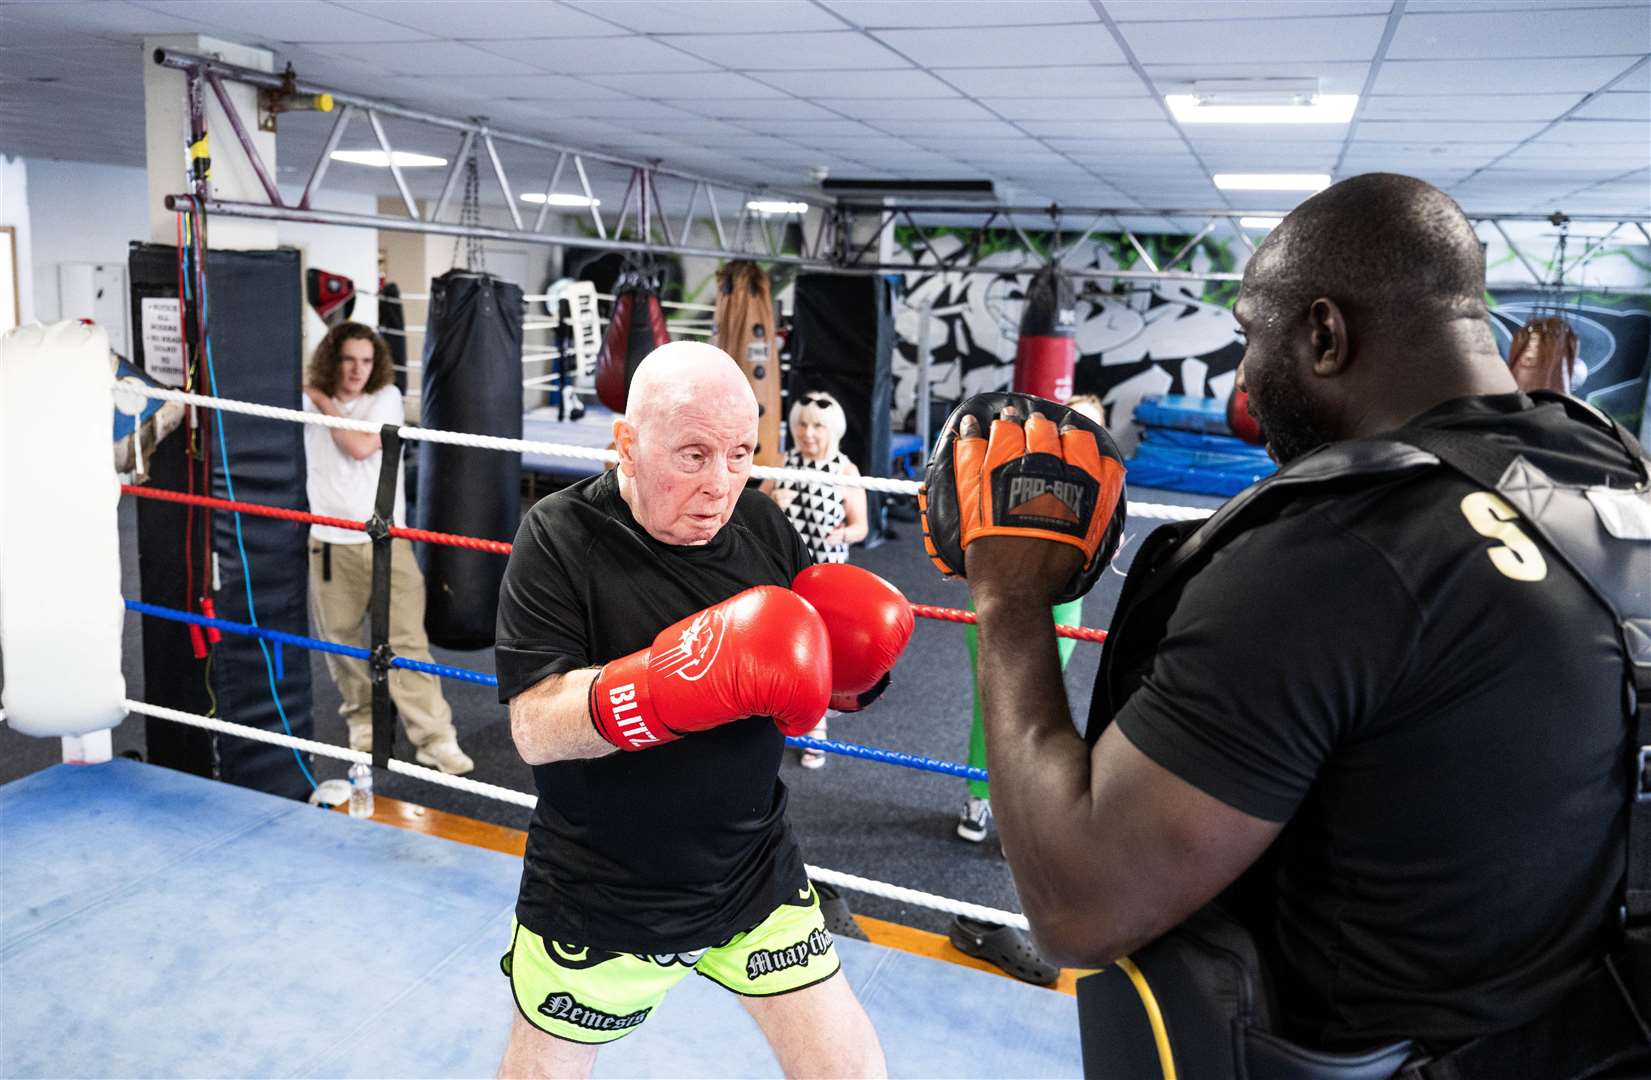 Baz spars with Nemesis gym owner Michael Tekyi